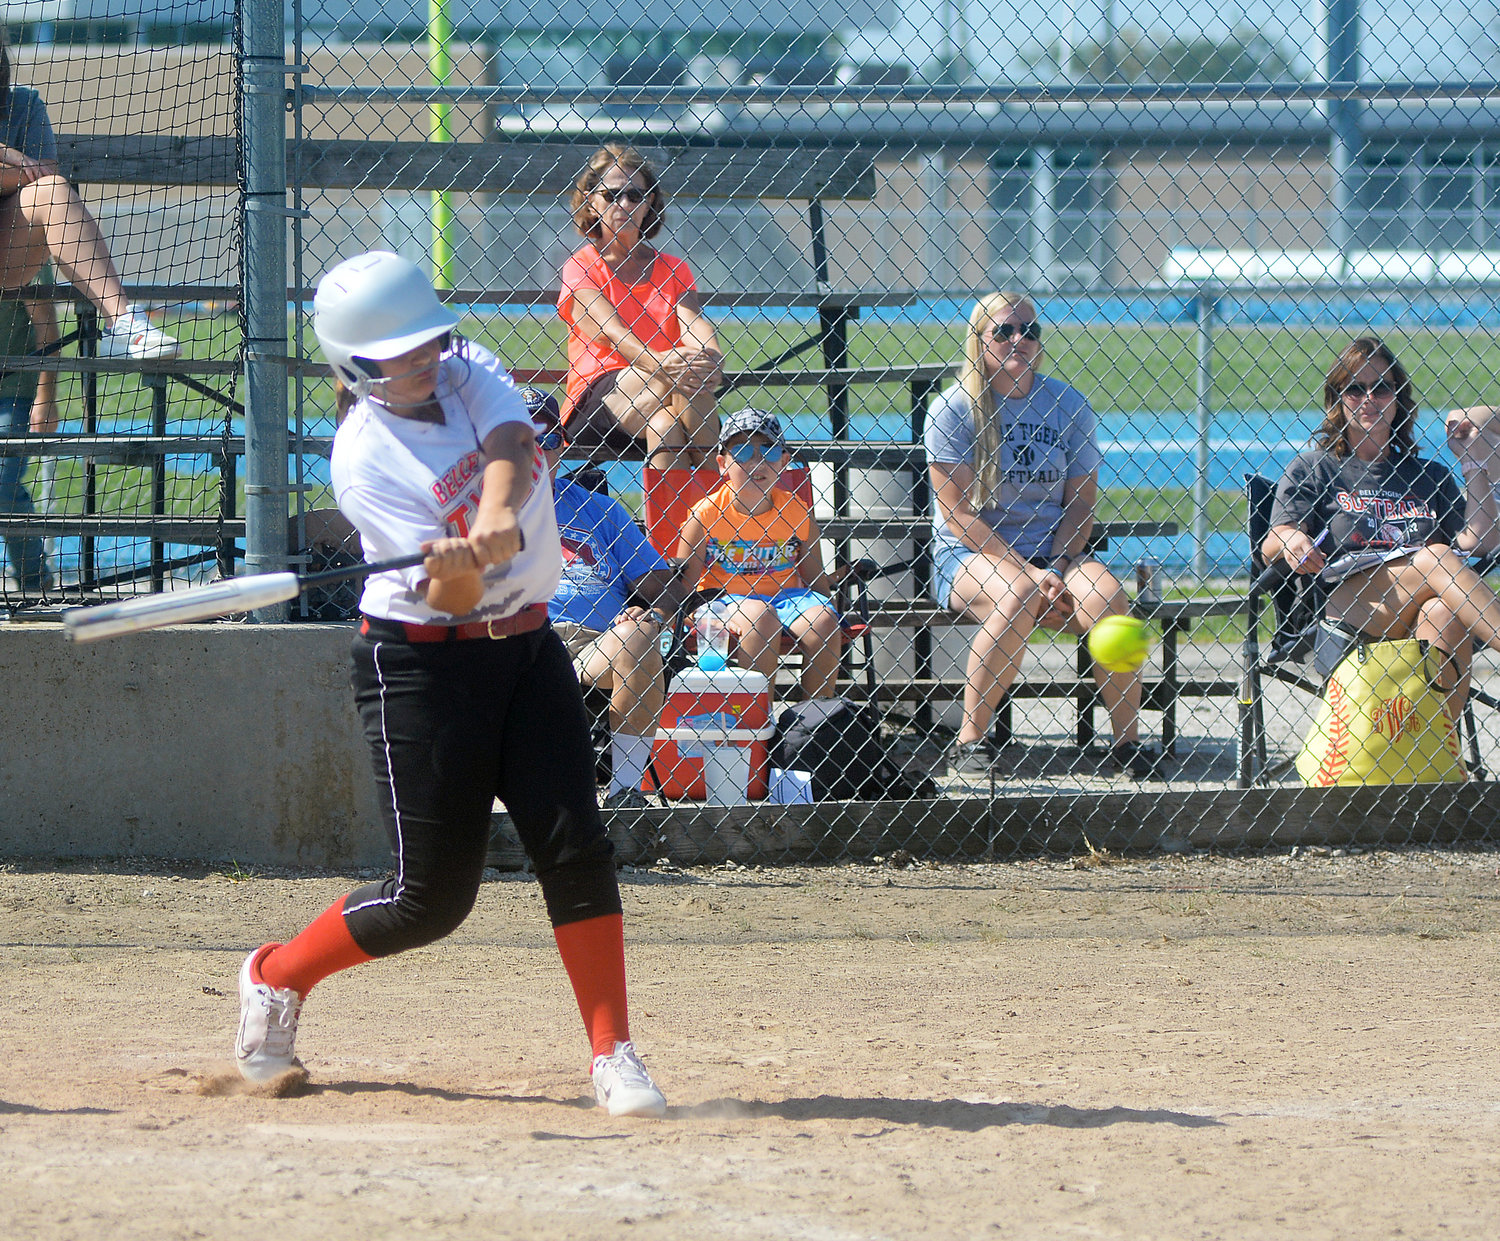 Dakota Butcher swings at a pitch for Belle Lady Tiger softball at the Montgomery County Fall Softball Classic Saturday along Highway 19. Butcher scored two runs as part of Belle’s 15-0 victory over St. Clair’s Lady Bulldogs in their tournament opener.